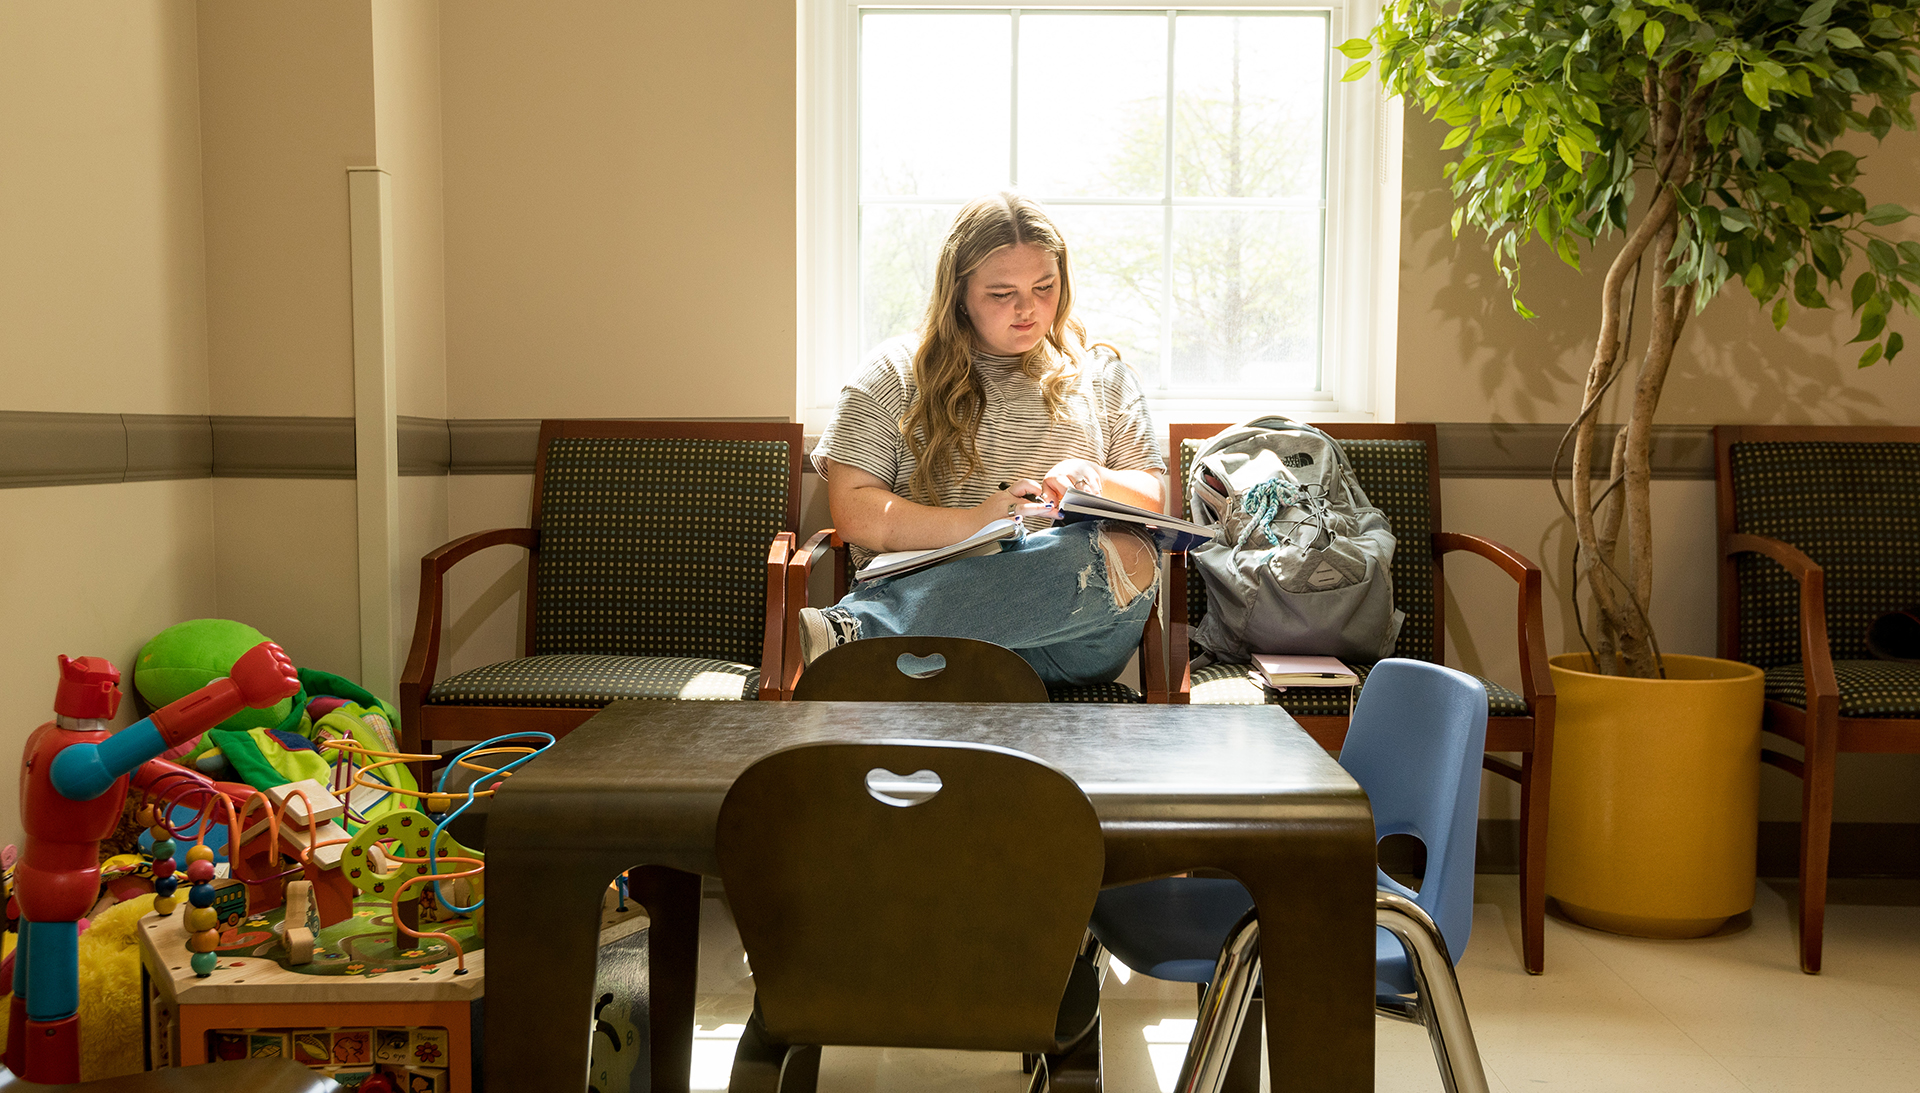 Taylor, a student in the Psychology program studying in the psychology clinic area.